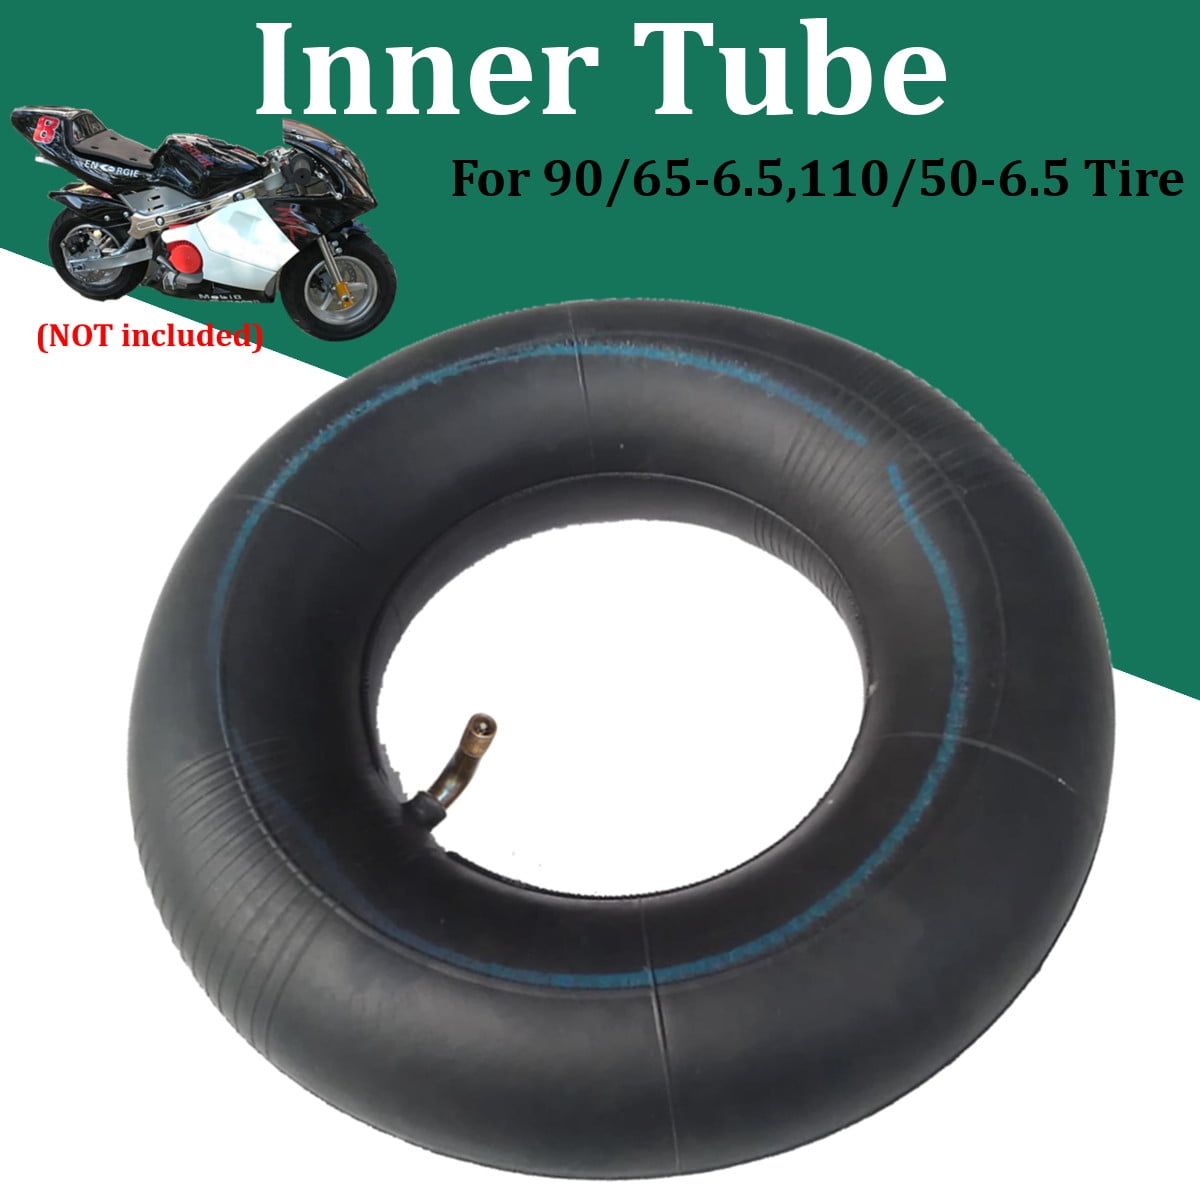 Details about   6.5'' Bicycle Bike Replacement Inner Tube For 90/65-6.5 110/50-6.5 Tire 47/49c 